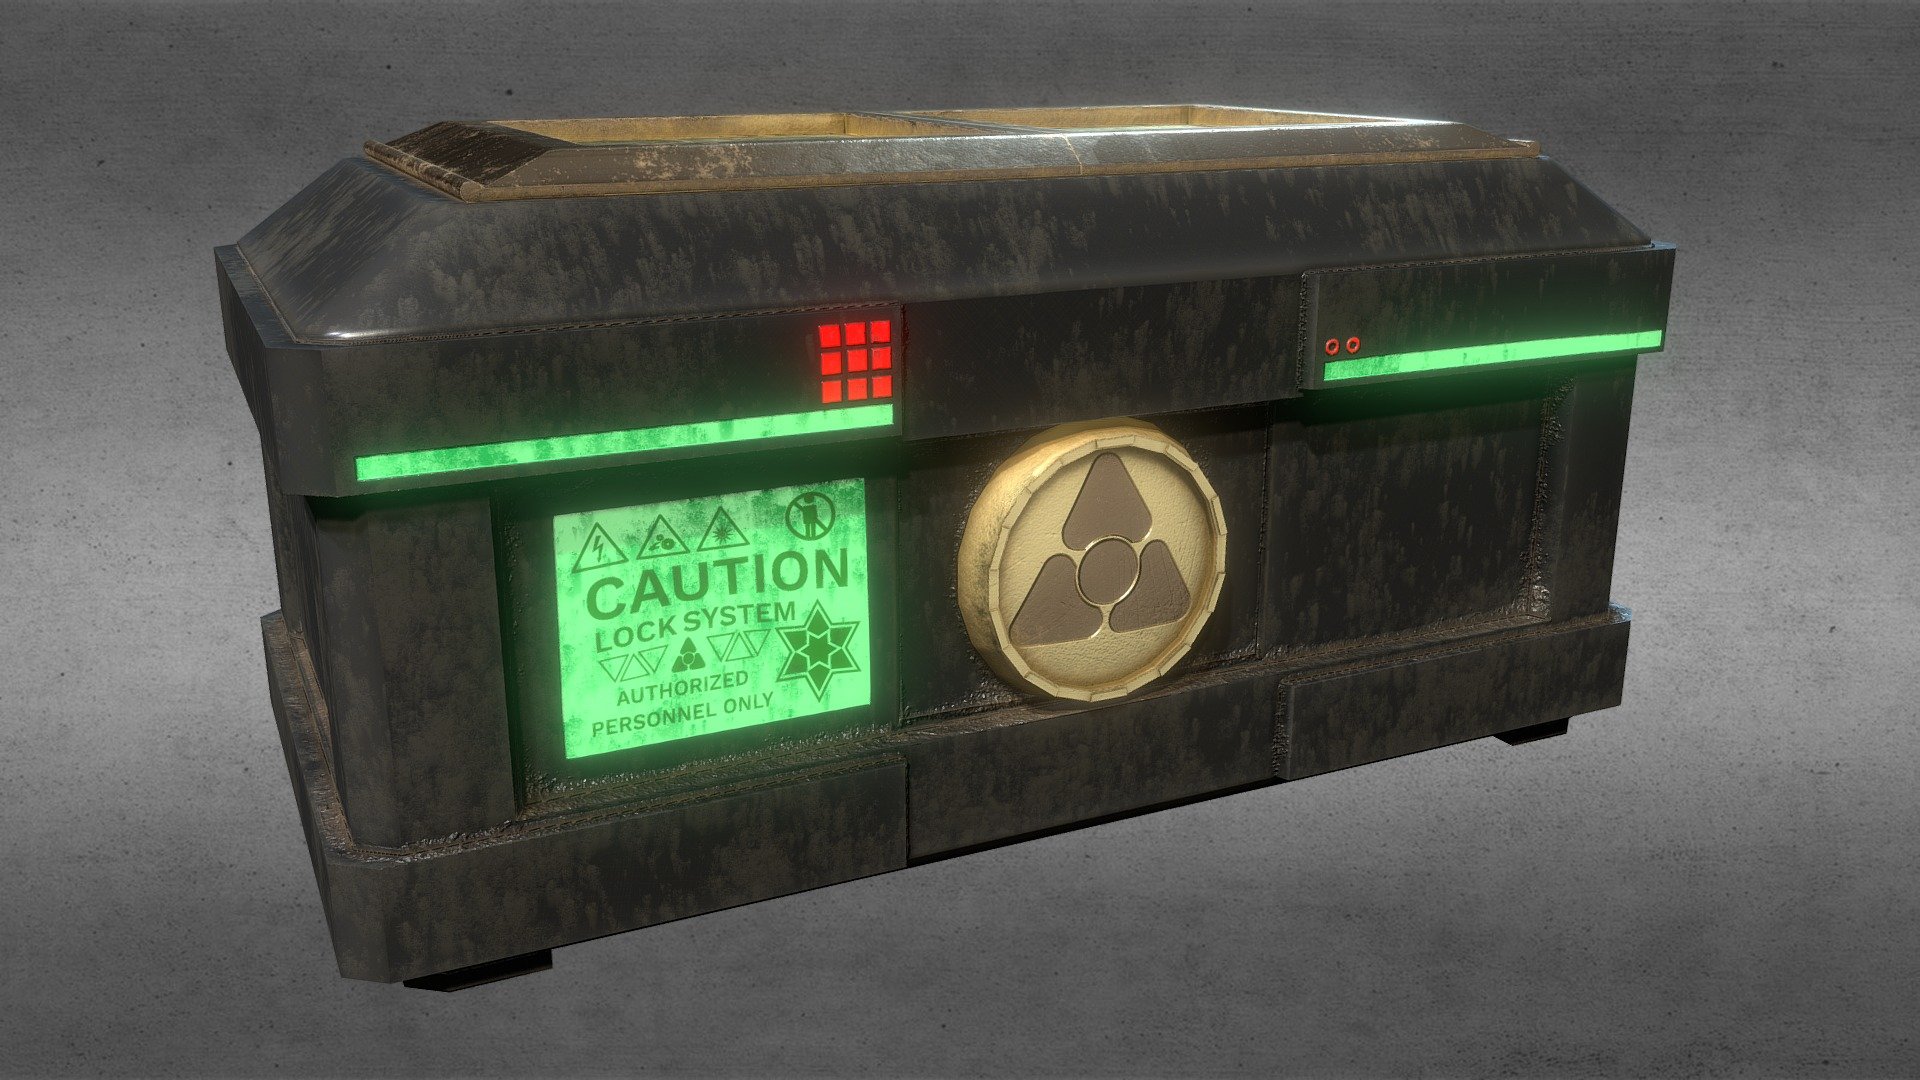 I had originally designed this as another loot box. The more I worked on it, though, the more I liked the idea of a futuristic dumpster 3d model